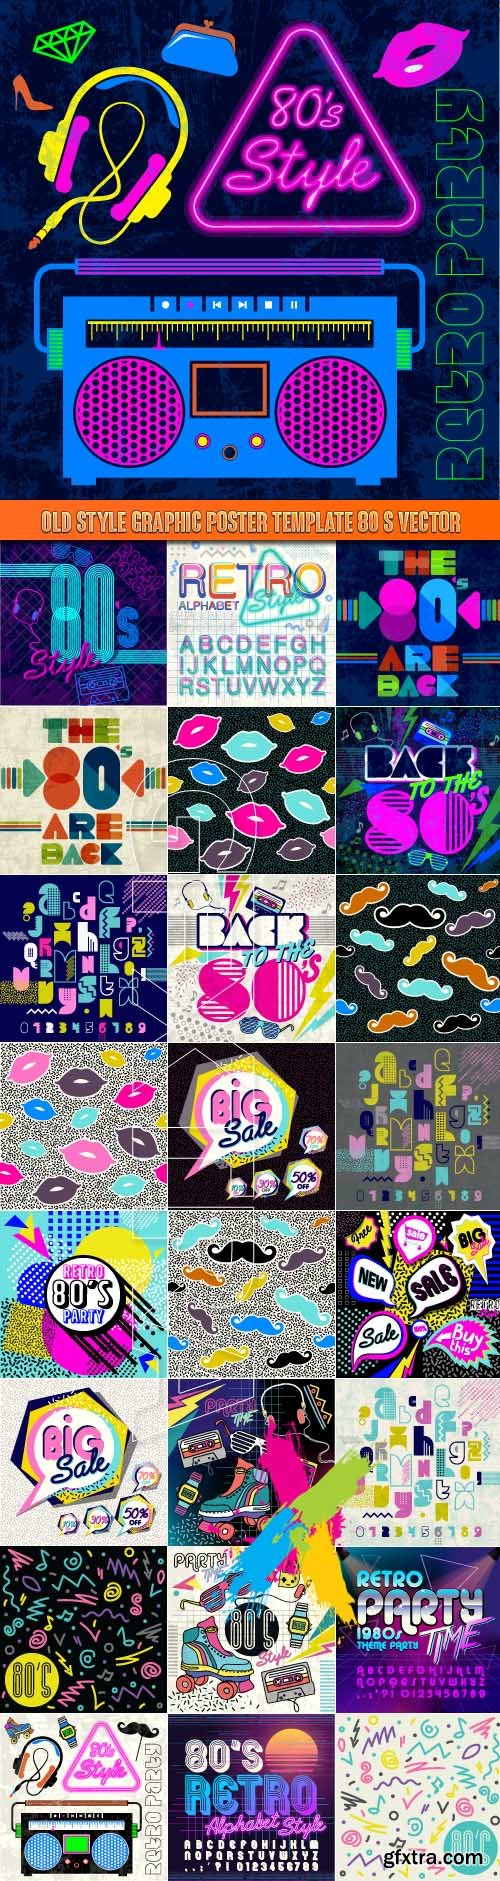 Old style graphic poster template 80 s vector